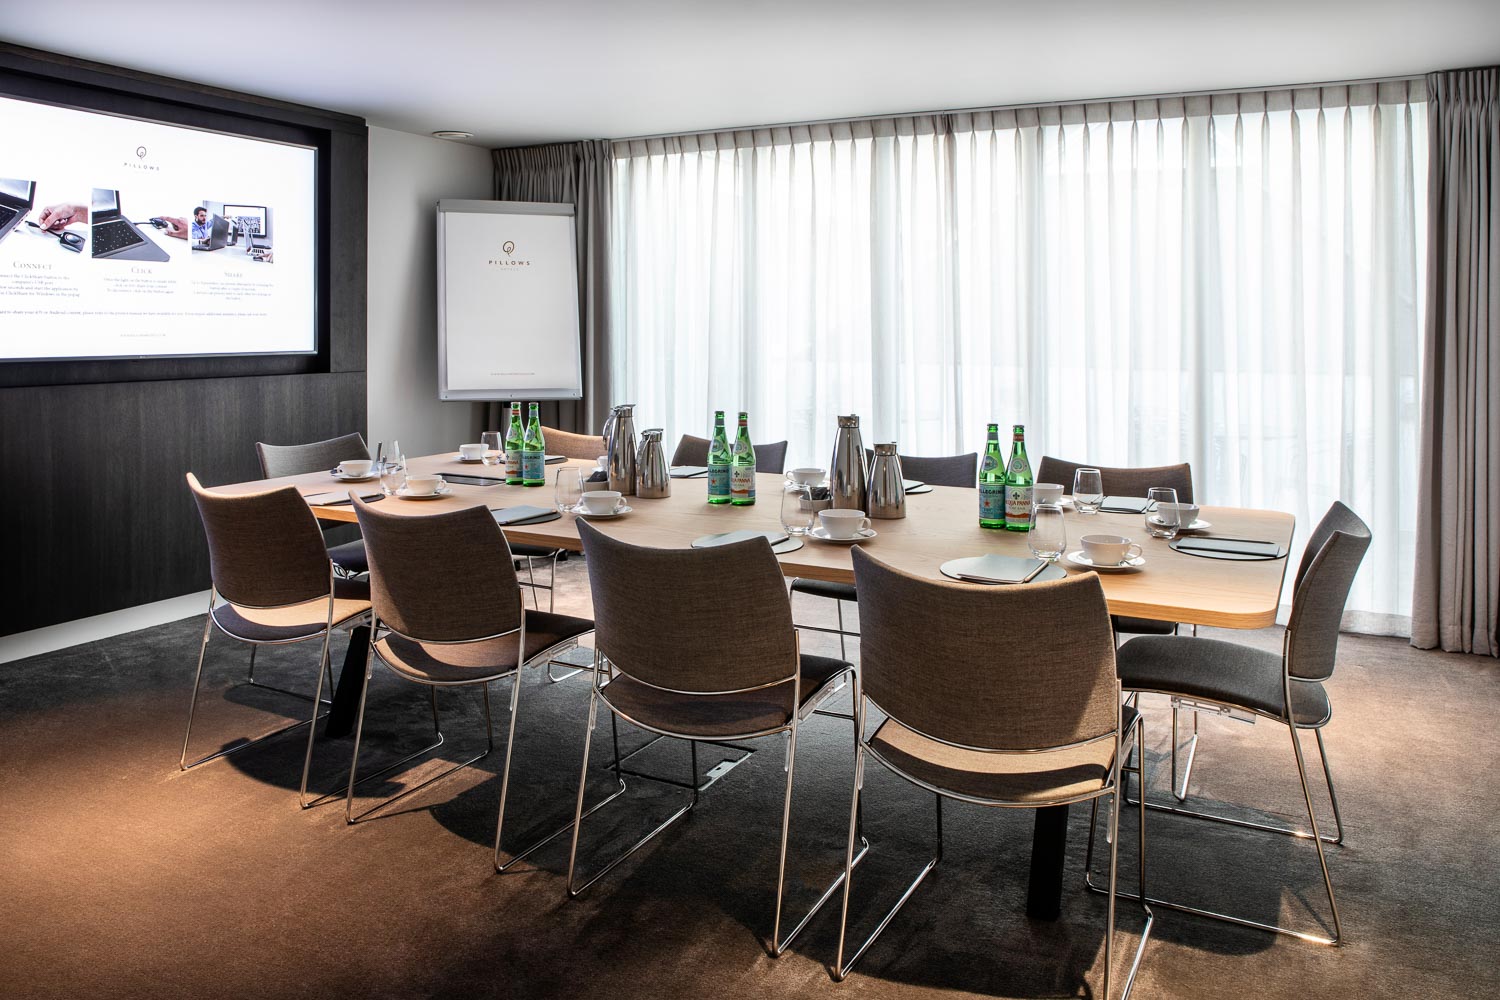 A bright meeting room table with grey chairs in Pillows Hotel Reylof in Ghent